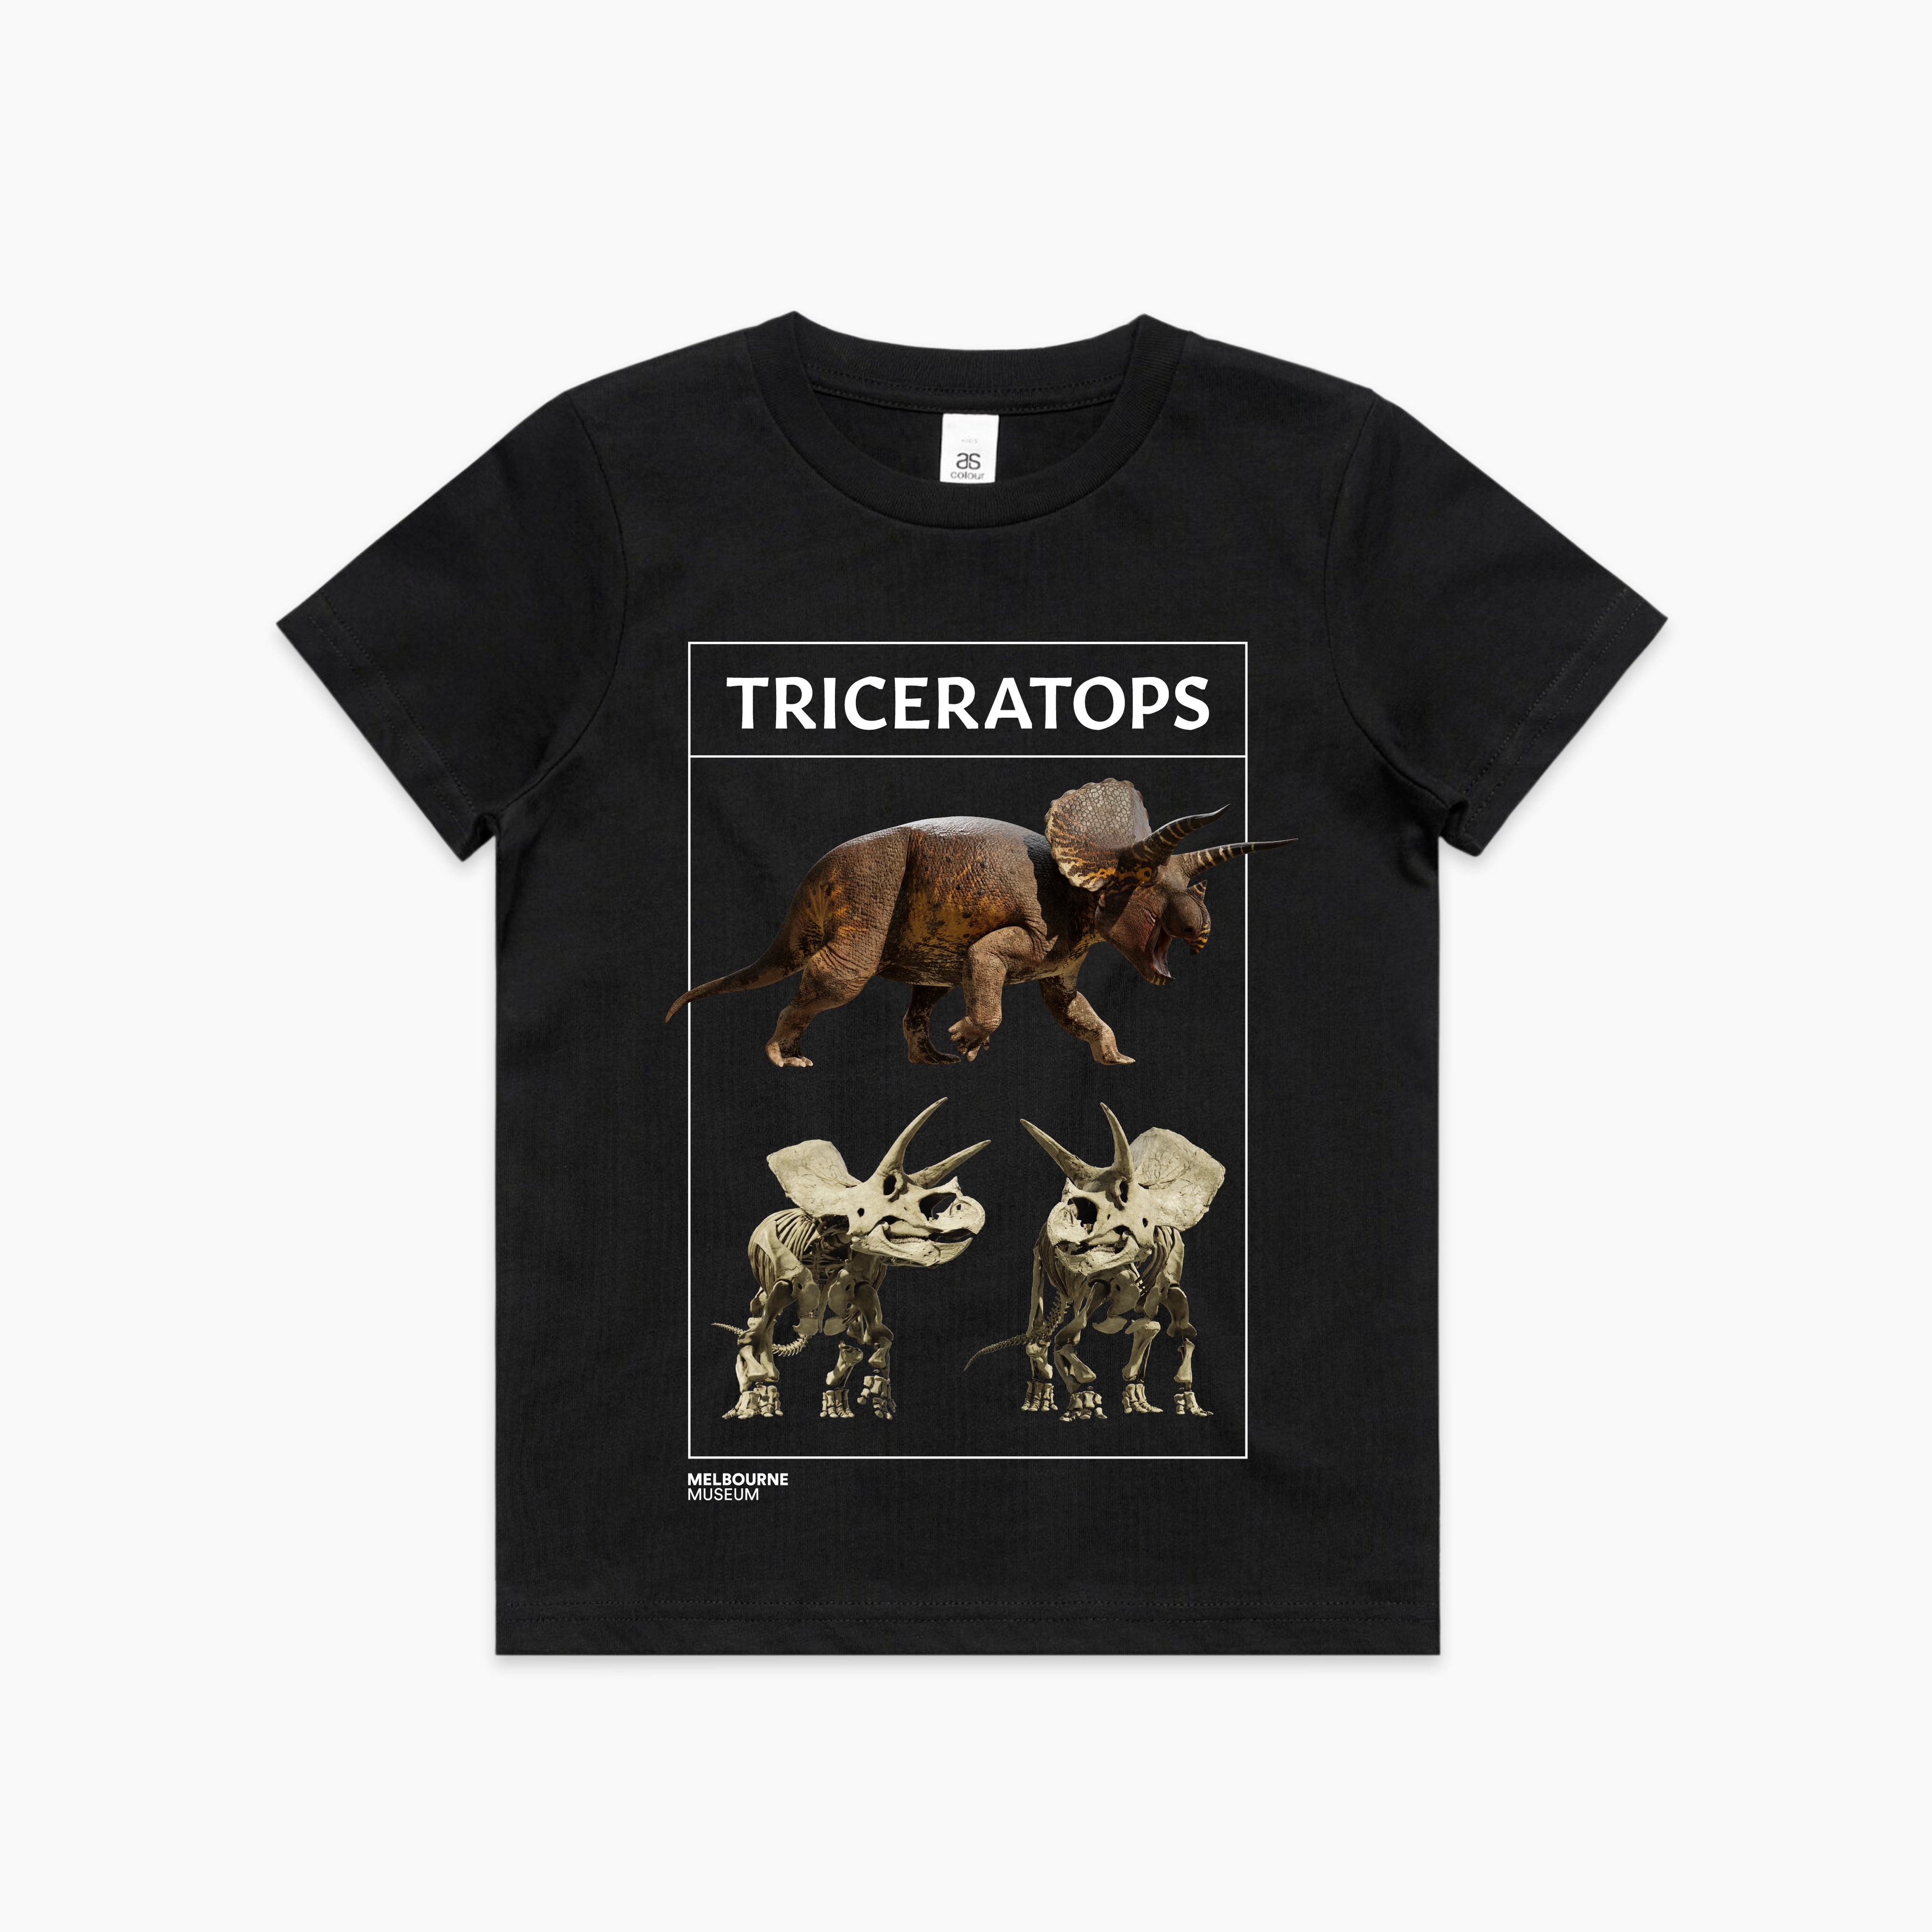 Melbourne Museum Triceratops Exhibition Kids Tee